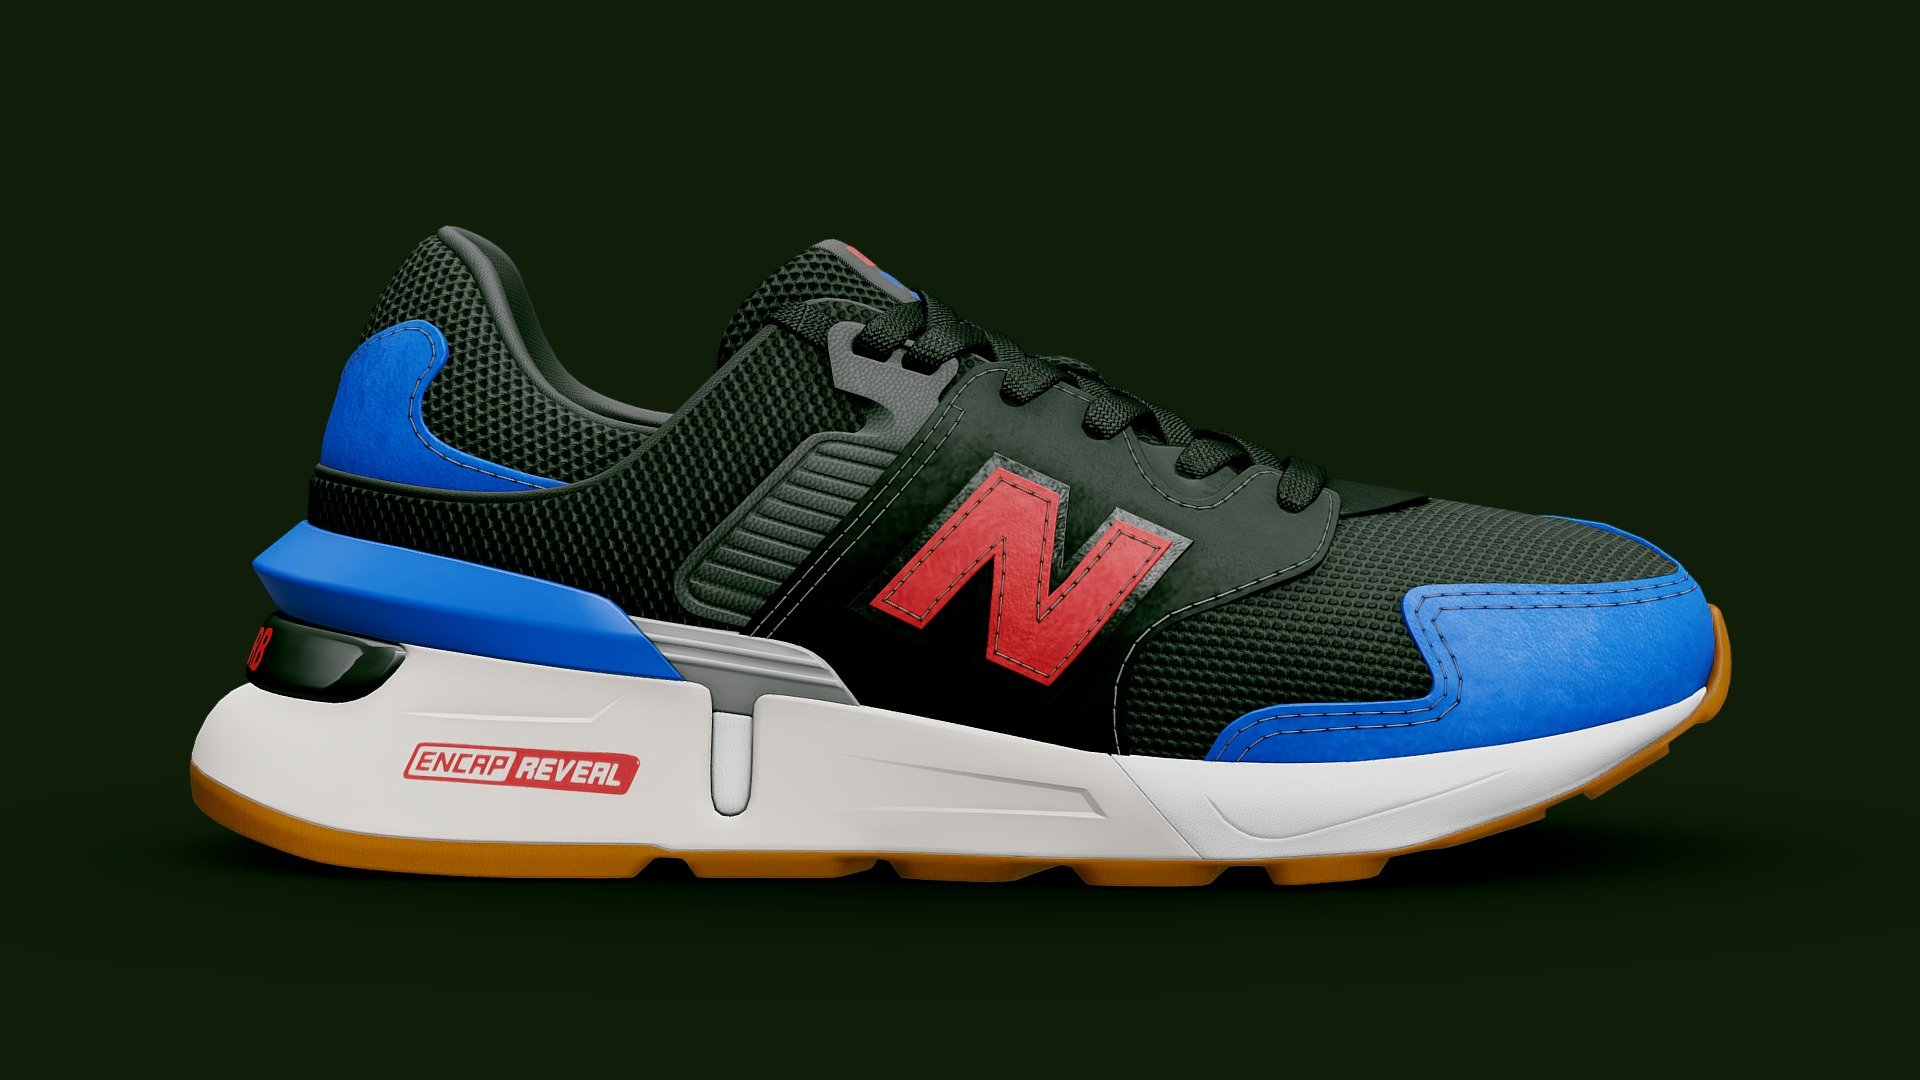 Mid-poly 3d model, separated parts and materials. Ready for customization, 3d configurators - New Balance 997 Sport - Buy Royalty Free 3D model by Eugene Korolev (@eugene.korolev) 3d model